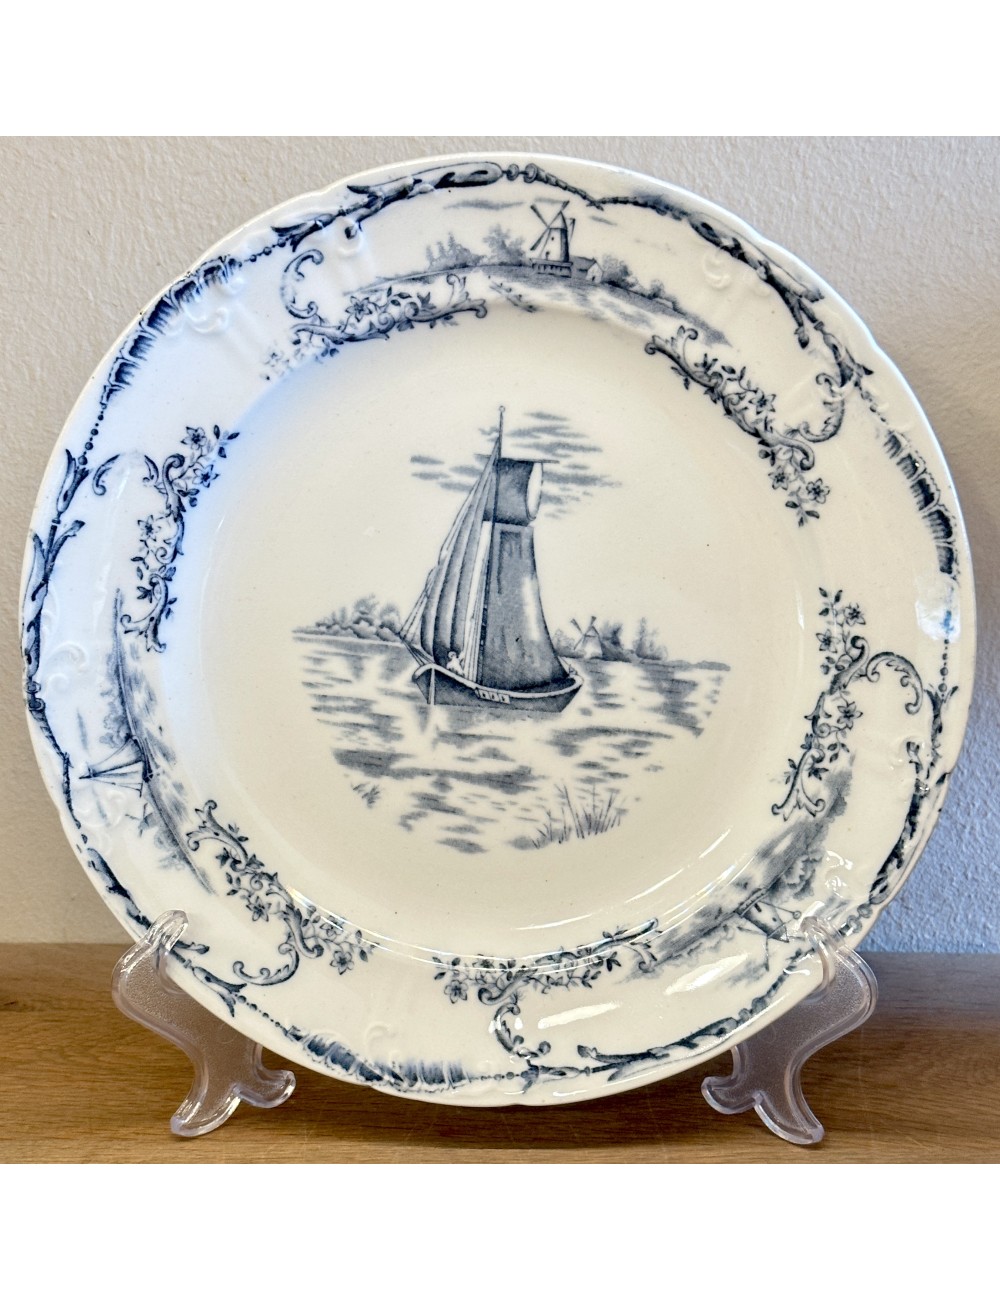 Dinner plate / Dinner plate - Winkle (England) - décor DELPH executed in blue